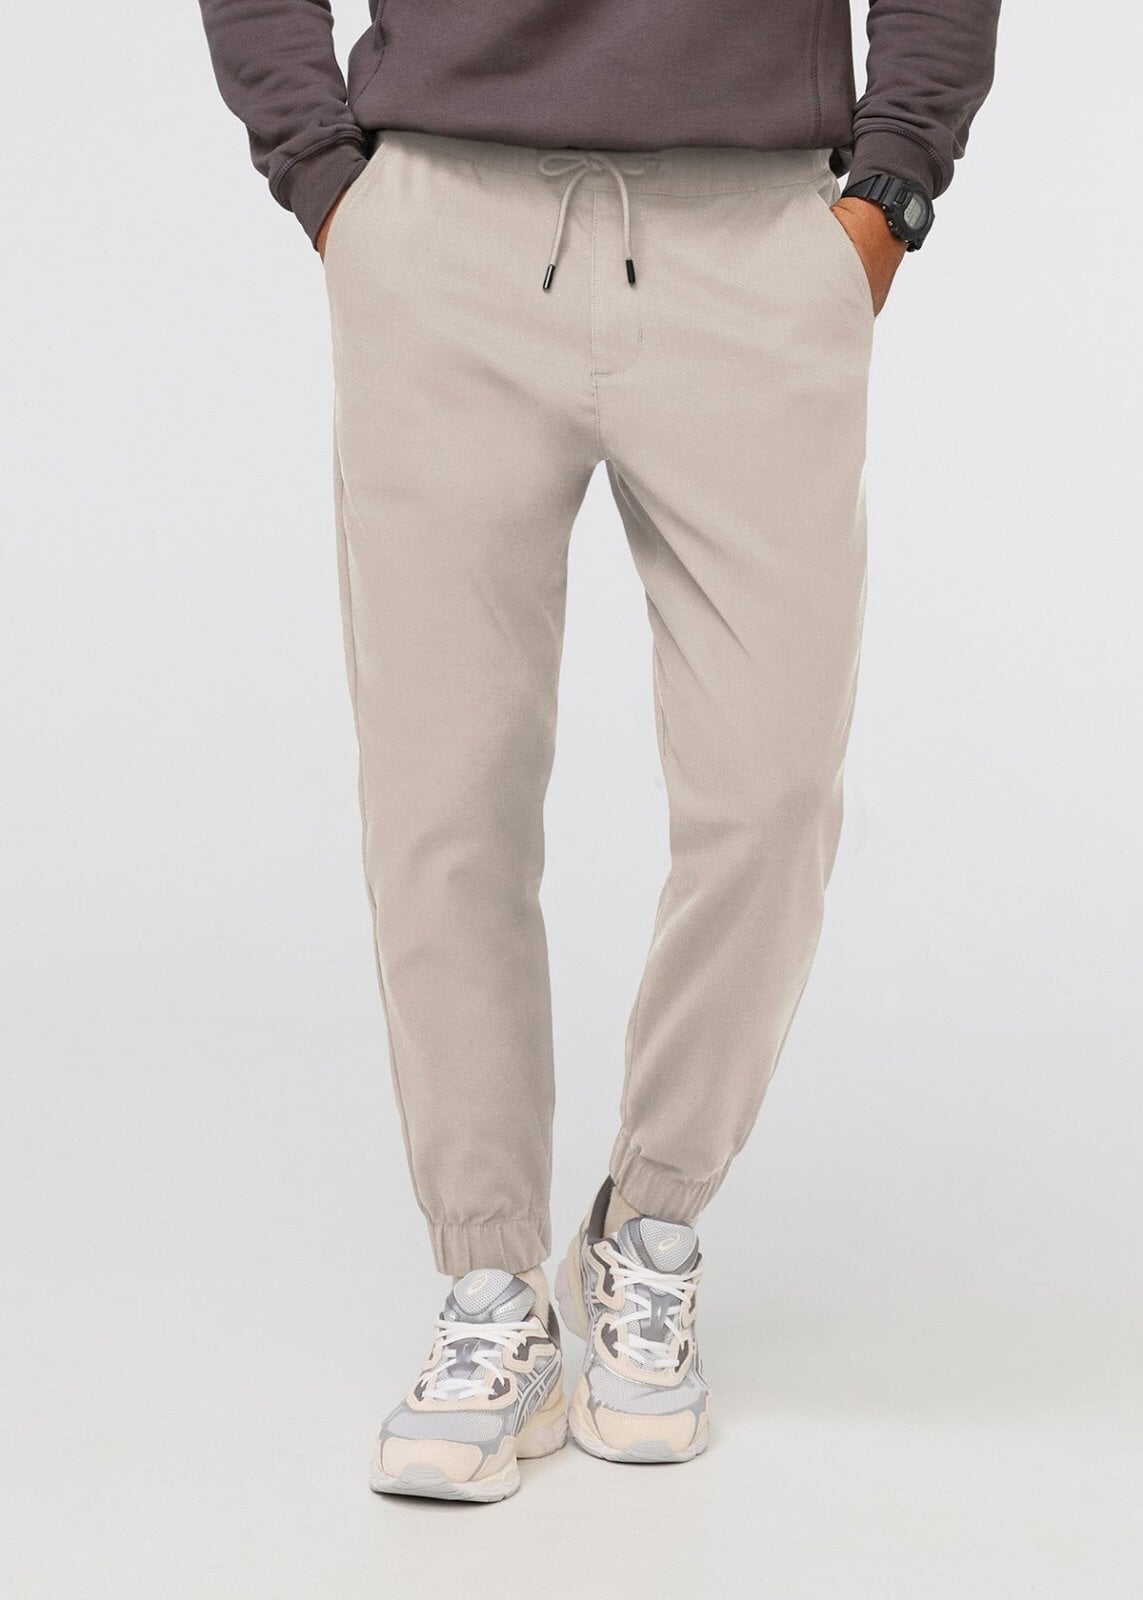 WT02 Young Men's Jogger Pants in Basic Solid Colors and Stretch